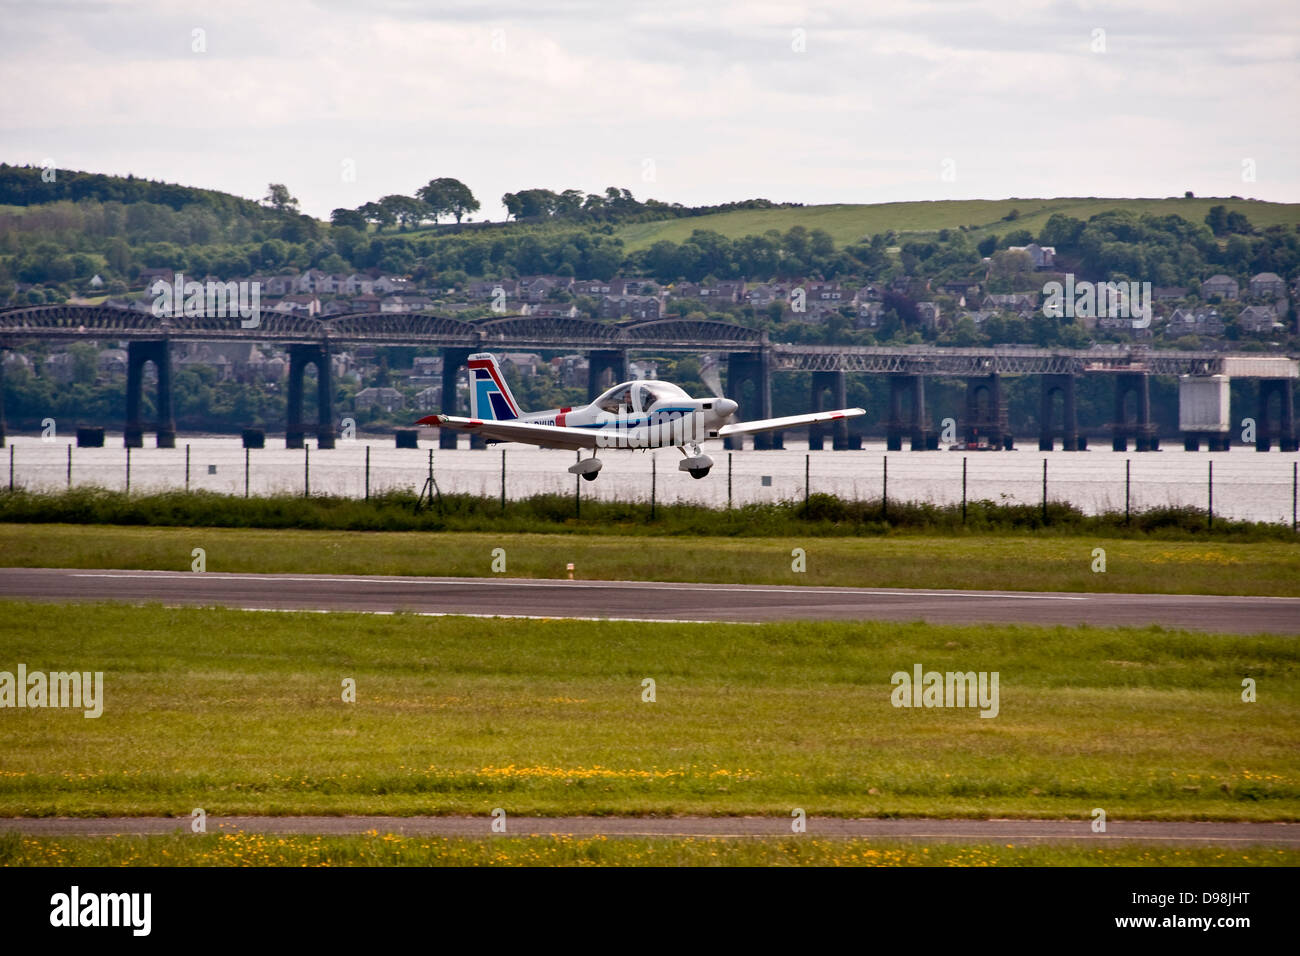 A Tayside Aviation Grob G115 Tutor T.1 / Heron G-BVHG aircraft taking off from Dundee Airport,UK Stock Photo